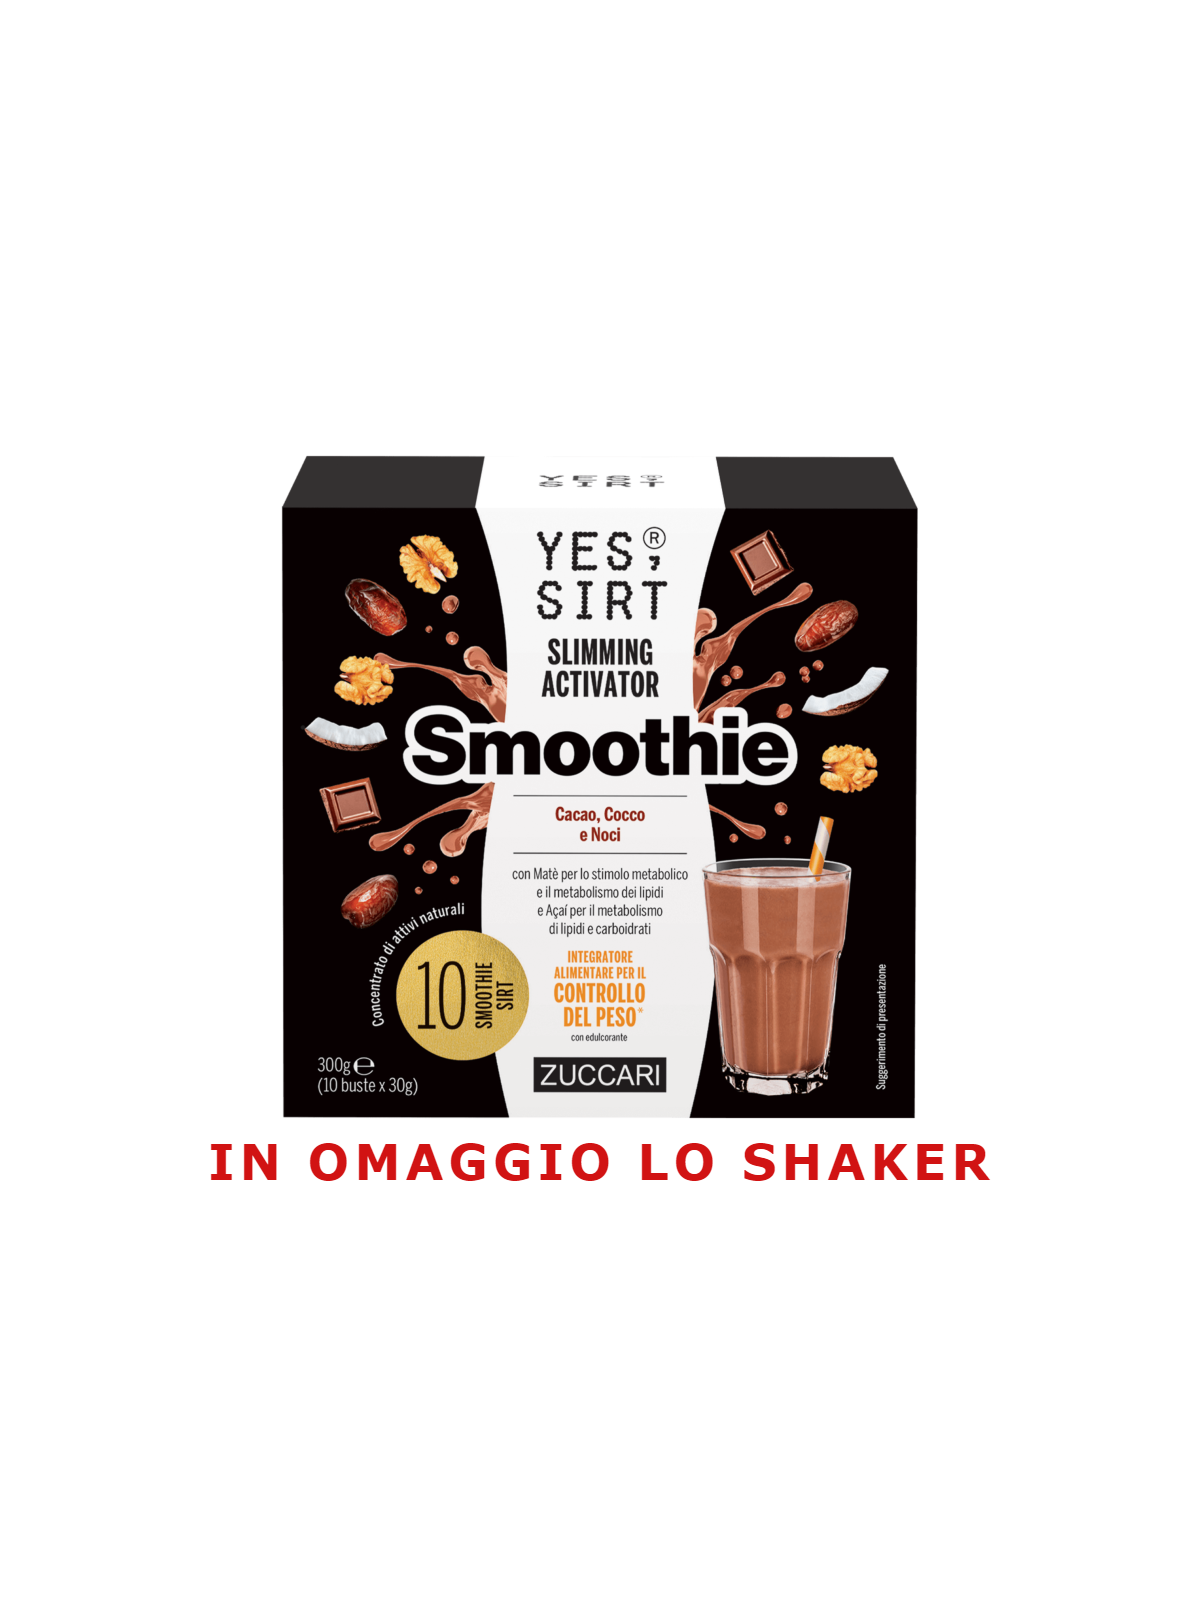 Yes Sirt Slimming Activator Smoothie Cacao, Cocco e Noci Zuccari